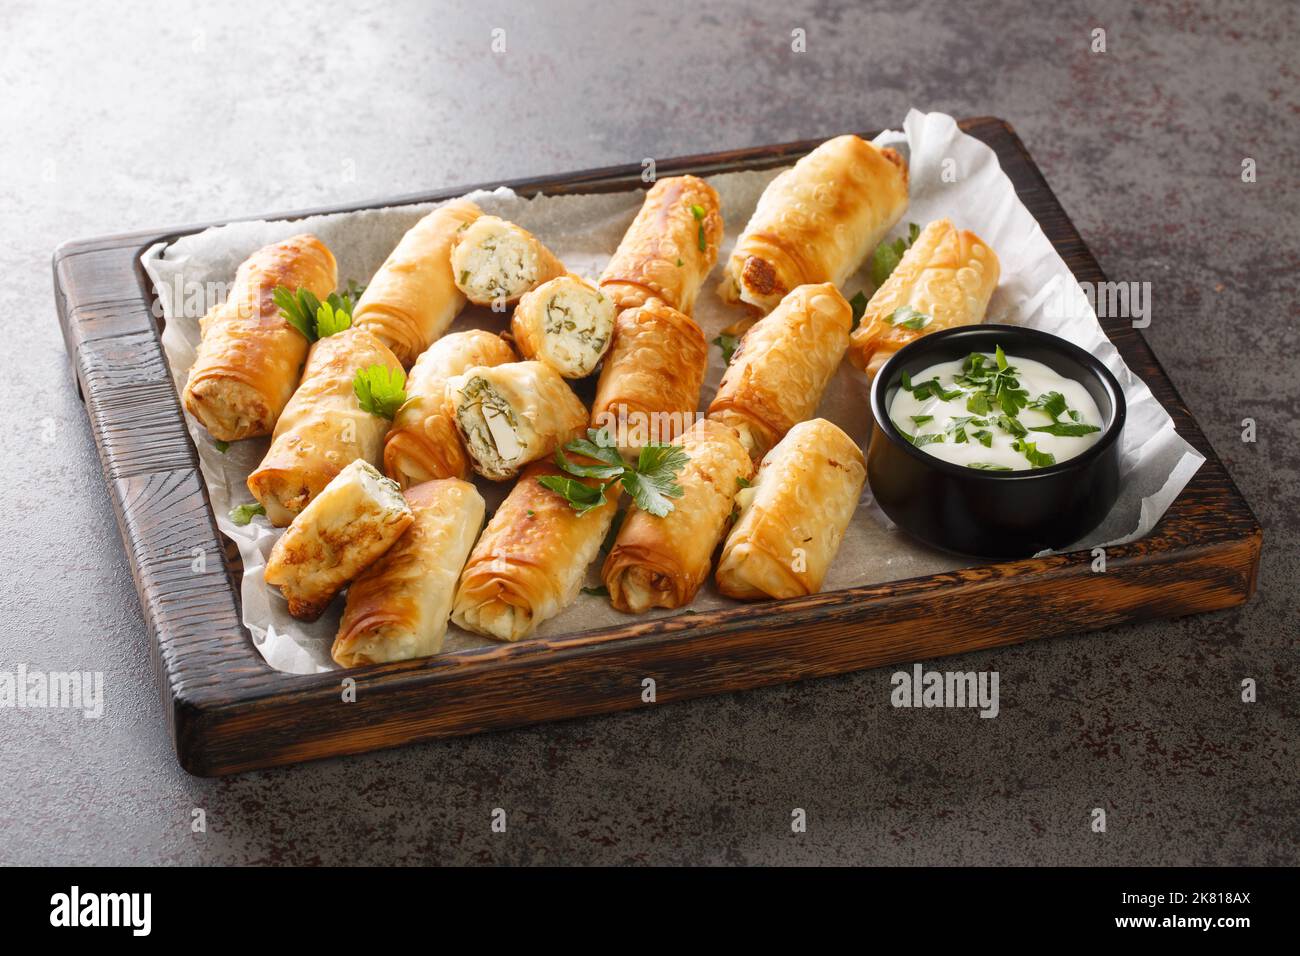 borek sigara boregi fried pastry wrapped in cheese in phyllo closeup on the wooden board on the table. Horizontal Stock Photo